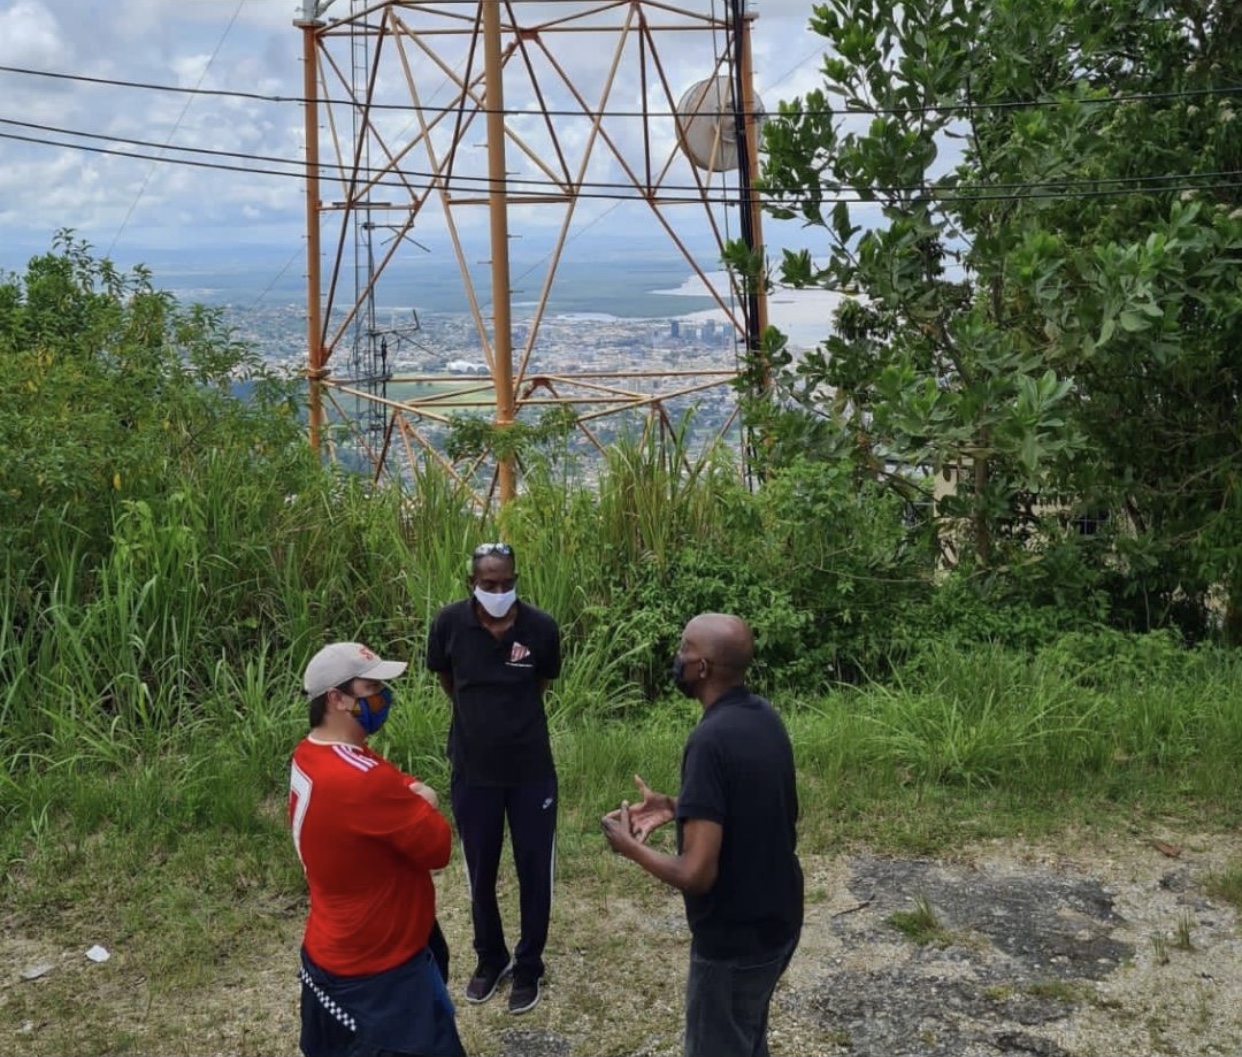 Communications Minister tours Cumberland Hill transmitter site